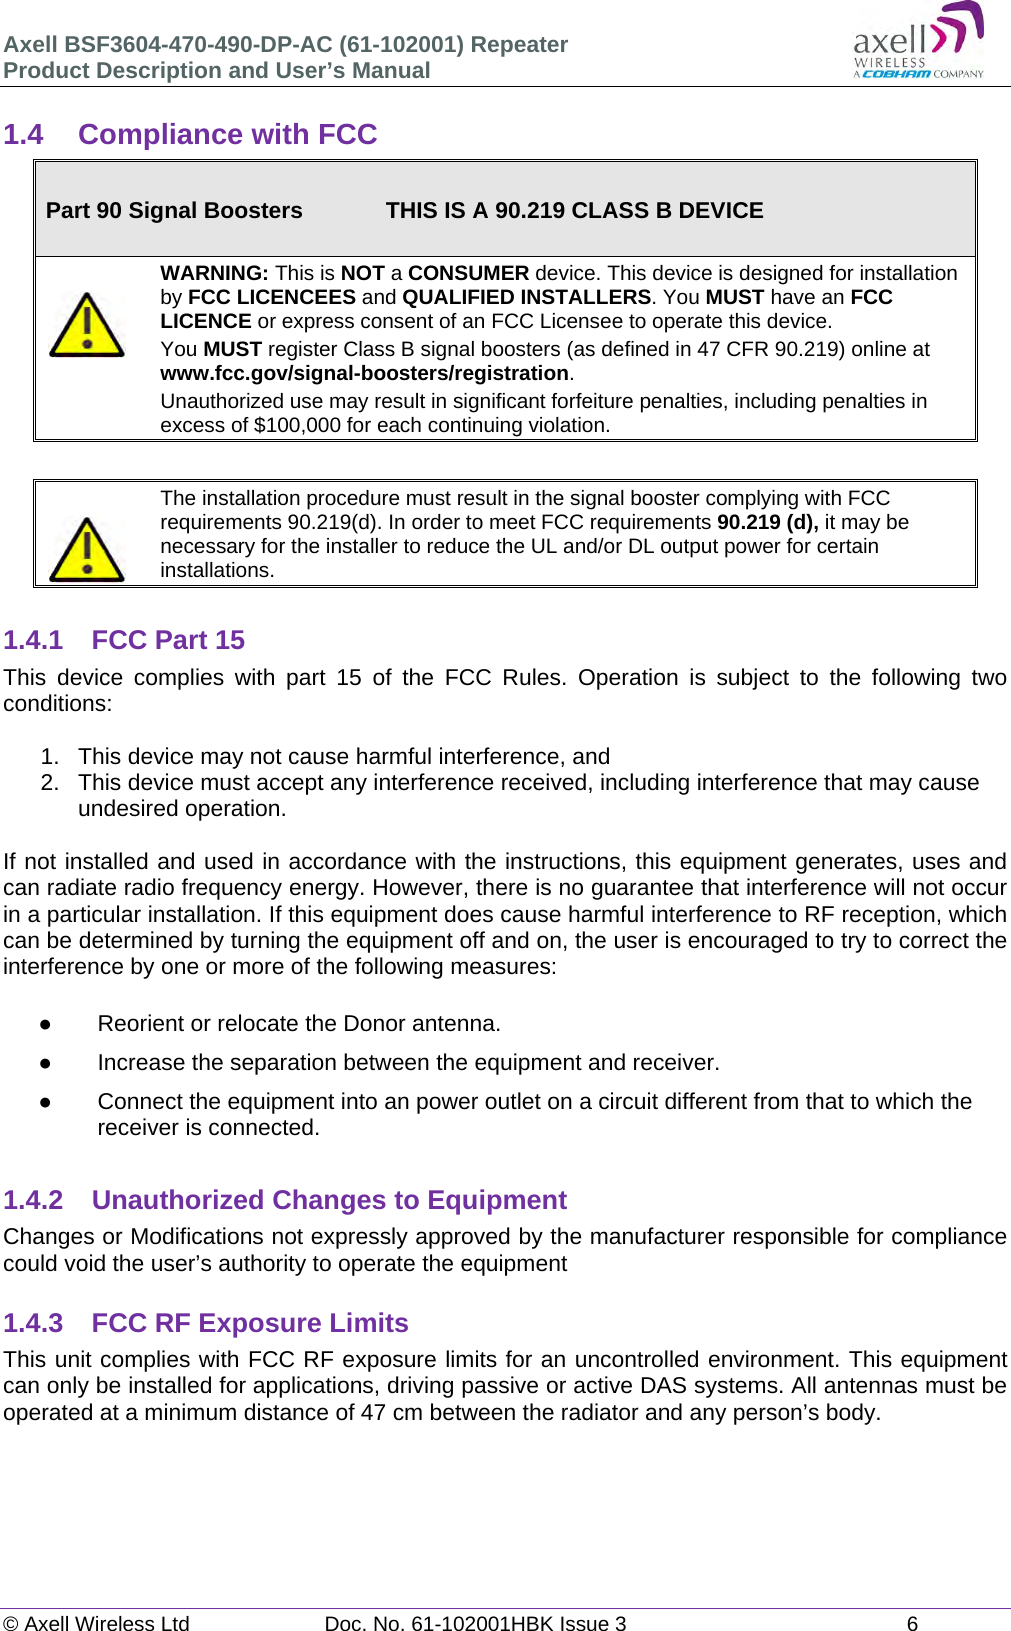 Axell BSF3604-470-490-DP-AC (61-102001) Repeater Product Description and User’s Manual © Axell Wireless Ltd  Doc. No. 61-102001HBK Issue 3  6   1.4  Compliance with FCC  Part 90 Signal Boosters             THIS IS A 90.219 CLASS B DEVICE    WARNING: This is NOT a CONSUMER device. This device is designed for installation by FCC LICENCEES and QUALIFIED INSTALLERS. You MUST have an FCC LICENCE or express consent of an FCC Licensee to operate this device.  You MUST register Class B signal boosters (as defined in 47 CFR 90.219) online at www.fcc.gov/signal-boosters/registration.  Unauthorized use may result in significant forfeiture penalties, including penalties in excess of $100,000 for each continuing violation.      The installation procedure must result in the signal booster complying with FCC requirements 90.219(d). In order to meet FCC requirements 90.219 (d), it may be necessary for the installer to reduce the UL and/or DL output power for certain installations.    1.4.1  FCC Part 15 This device complies with part 15 of the FCC Rules. Operation is subject to the following two conditions:   1.  This device may not cause harmful interference, and   2.  This device must accept any interference received, including interference that may cause undesired operation.   If not installed and used in accordance with the instructions, this equipment generates, uses and can radiate radio frequency energy. However, there is no guarantee that interference will not occur in a particular installation. If this equipment does cause harmful interference to RF reception, which can be determined by turning the equipment off and on, the user is encouraged to try to correct the interference by one or more of the following measures:    Reorient or relocate the Donor antenna.   Increase the separation between the equipment and receiver.   Connect the equipment into an power outlet on a circuit different from that to which the receiver is connected.  1.4.2  Unauthorized Changes to Equipment Changes or Modifications not expressly approved by the manufacturer responsible for compliance could void the user’s authority to operate the equipment  1.4.3  FCC RF Exposure Limits This unit complies with FCC RF exposure limits for an uncontrolled environment. This equipment can only be installed for applications, driving passive or active DAS systems. All antennas must be operated at a minimum distance of 47 cm between the radiator and any person’s body.   